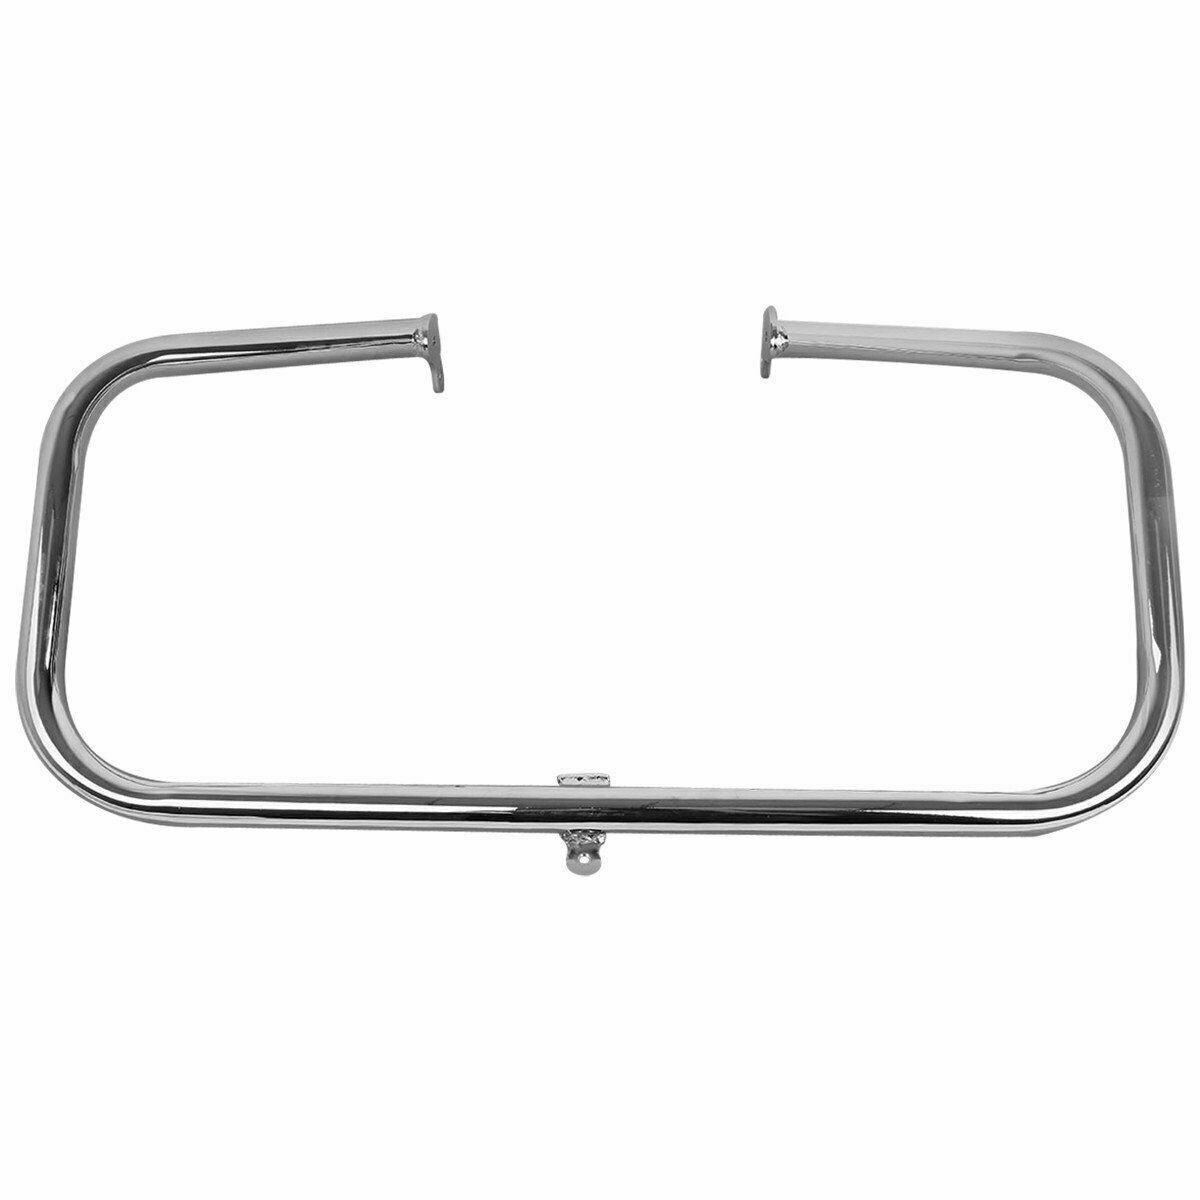 1 1/4" Highway Engine Guard Crash Bar For Harley Touring Road Street Glide 09-20 - Moto Life Products